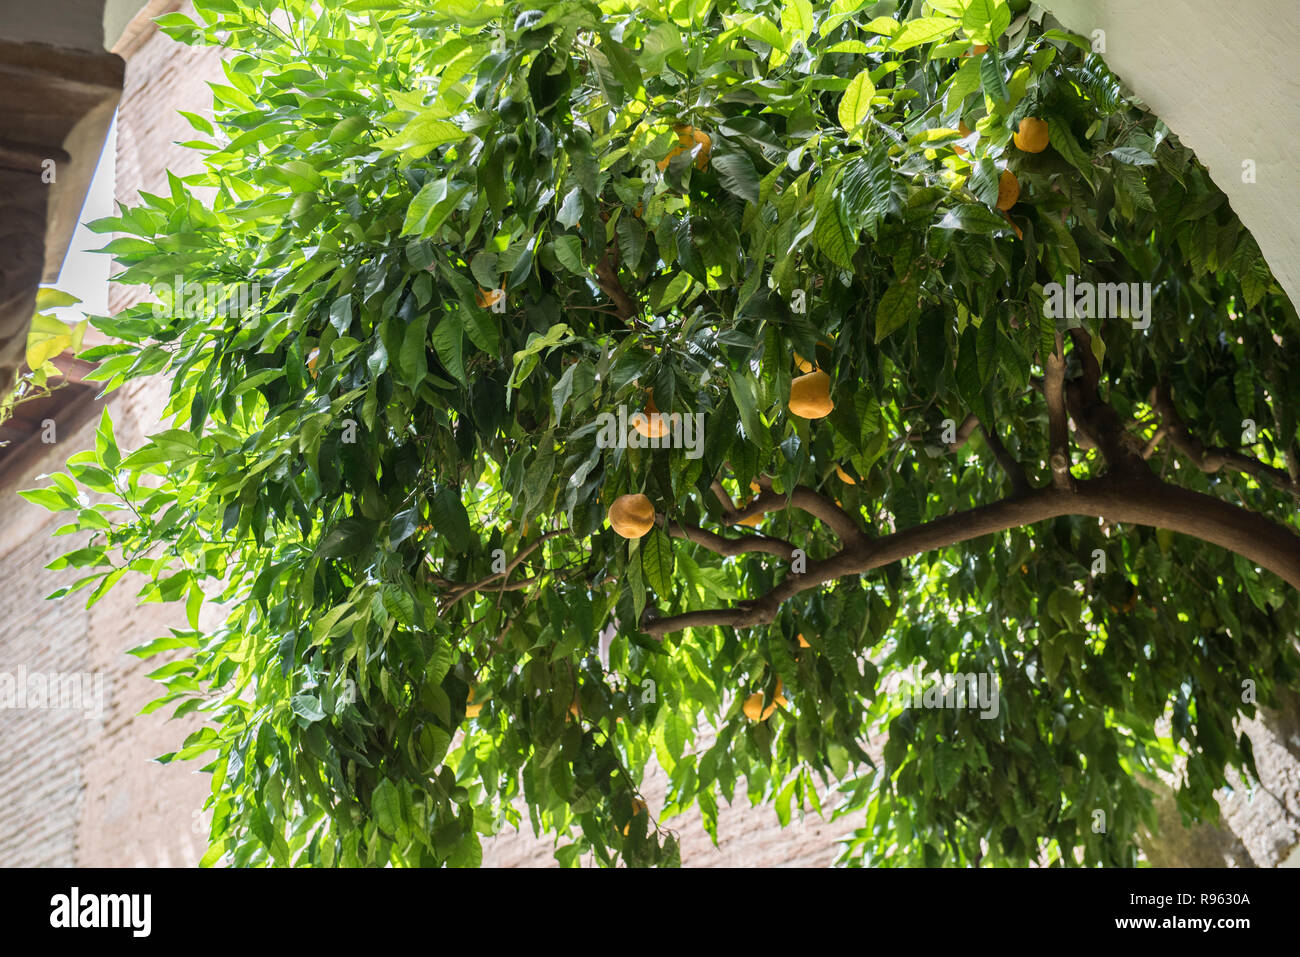 A Nispero tree with fruits hanging is seen on this picture. On the background, some parts of a building is seen. Nispero is a very famous Spanish frui Stock Photo